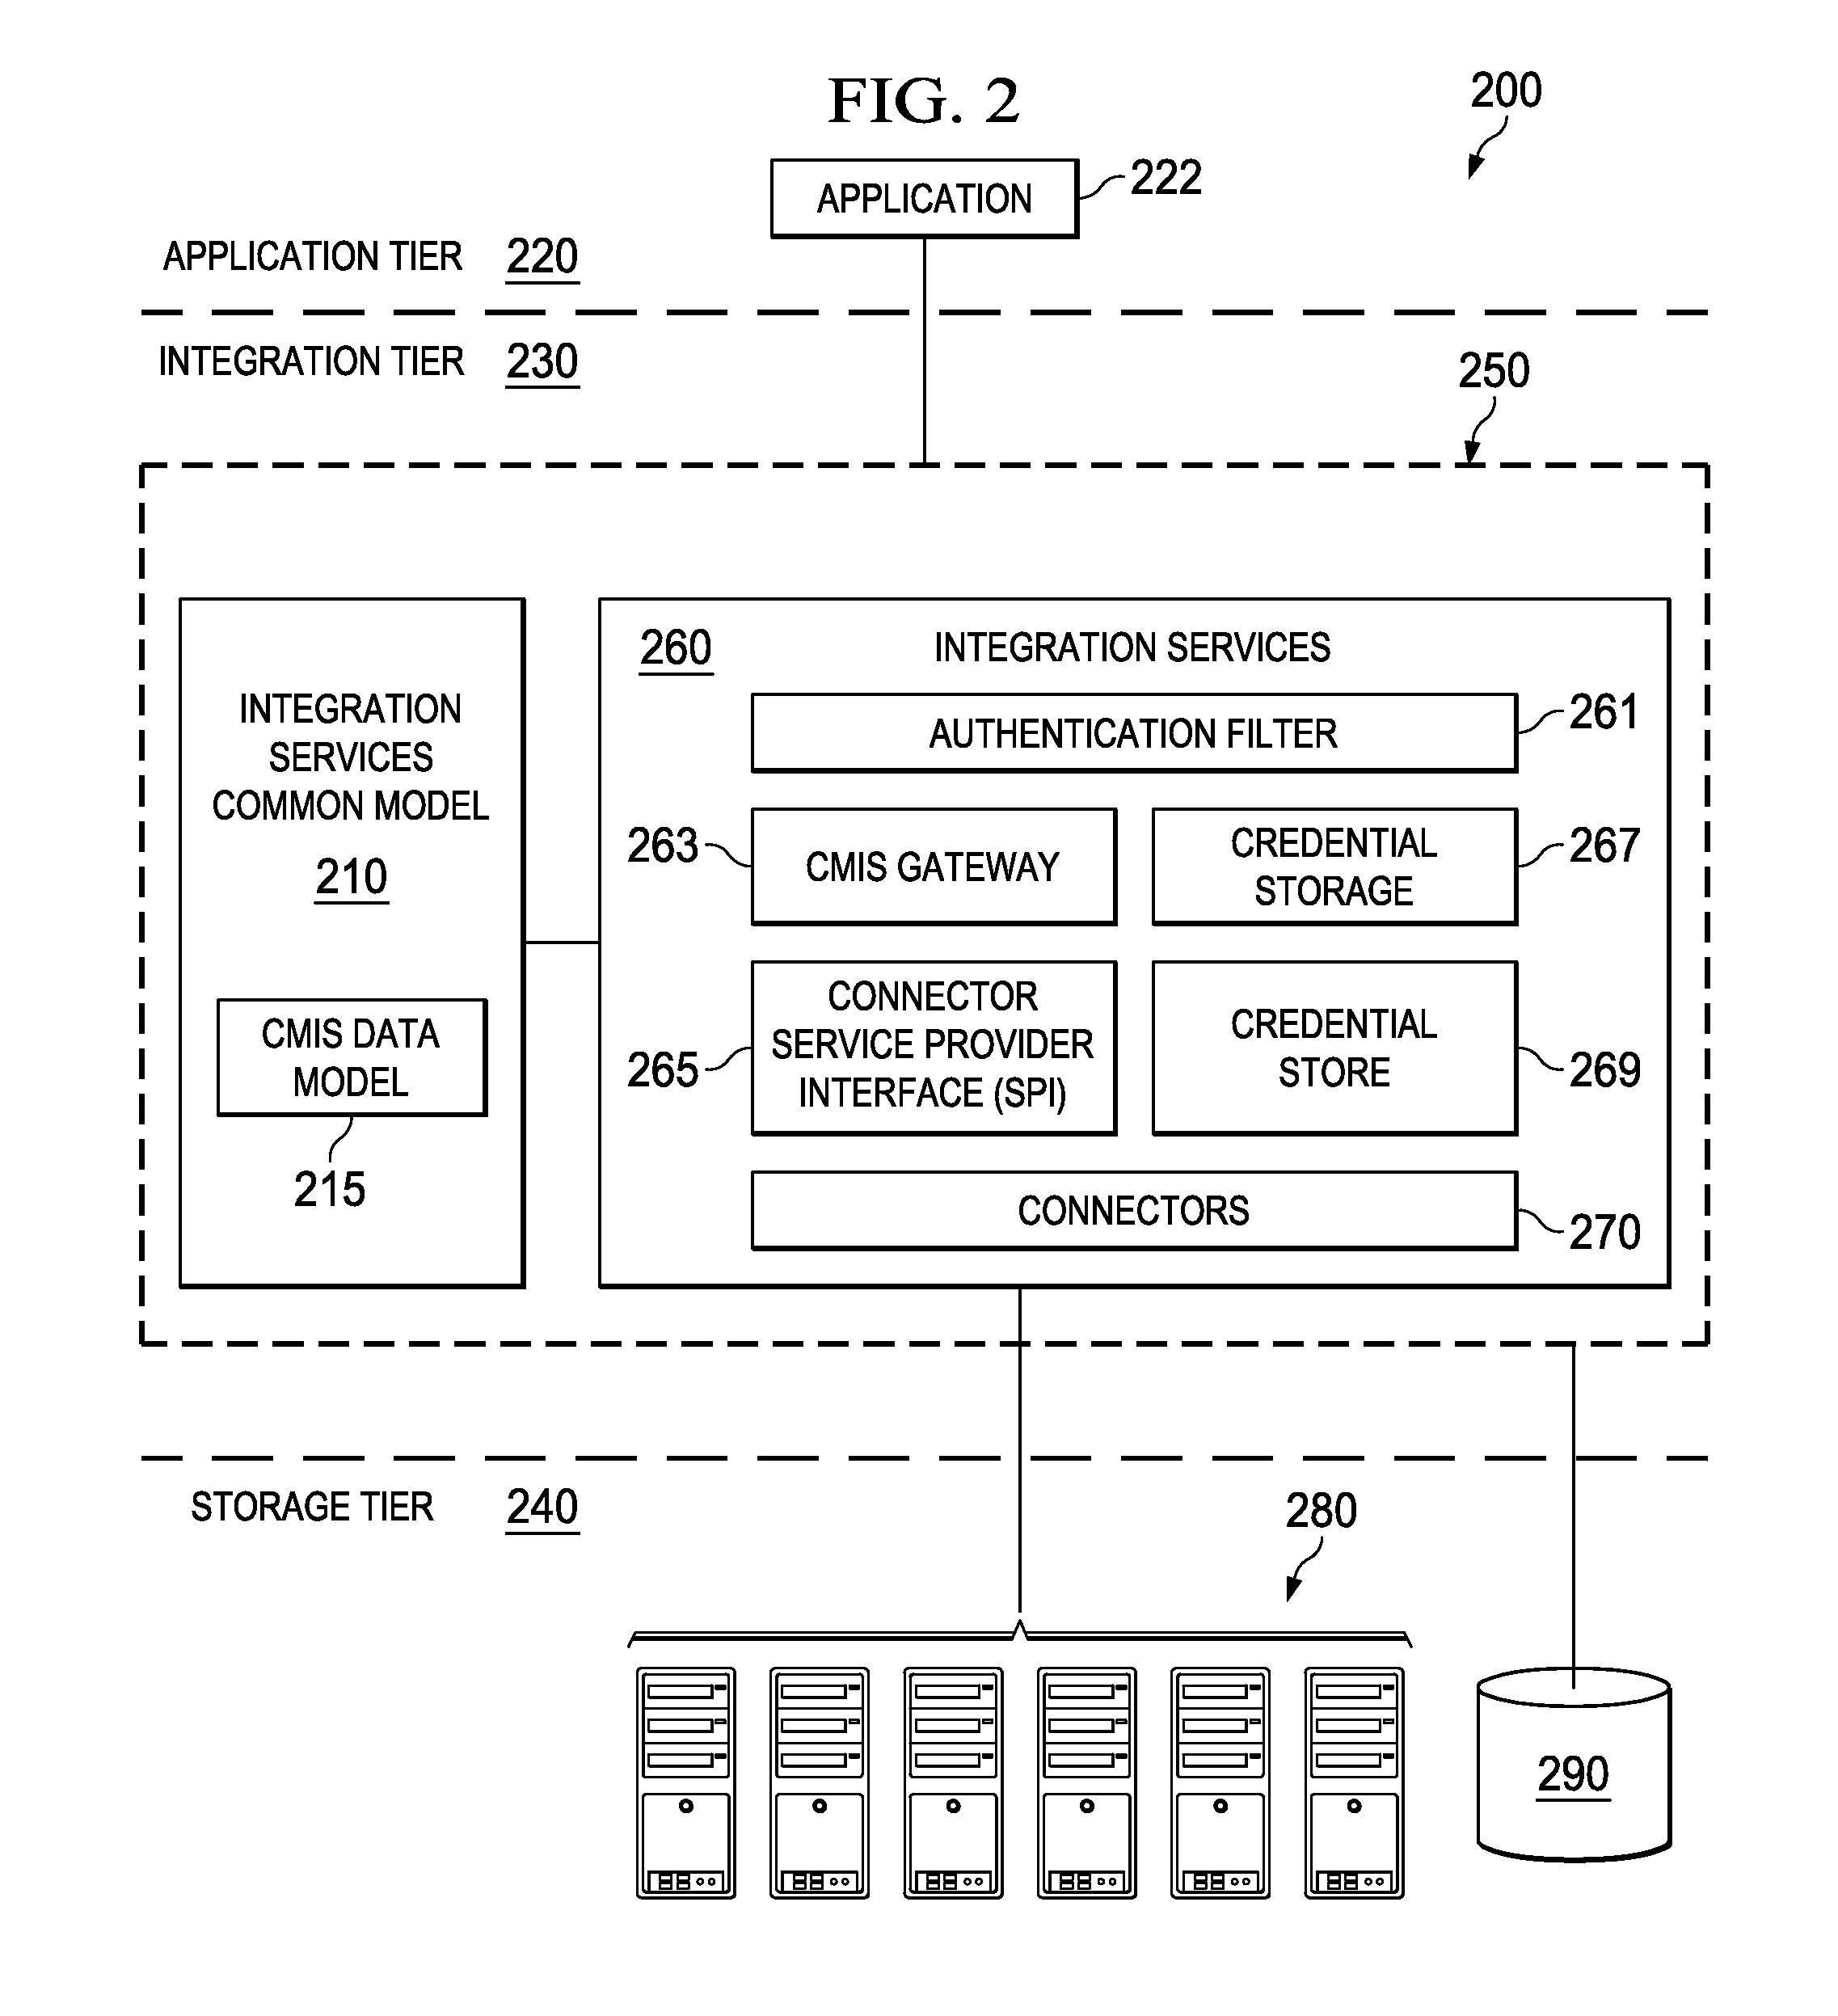 Systems, methods and computer program products for information integration across disparate information systems